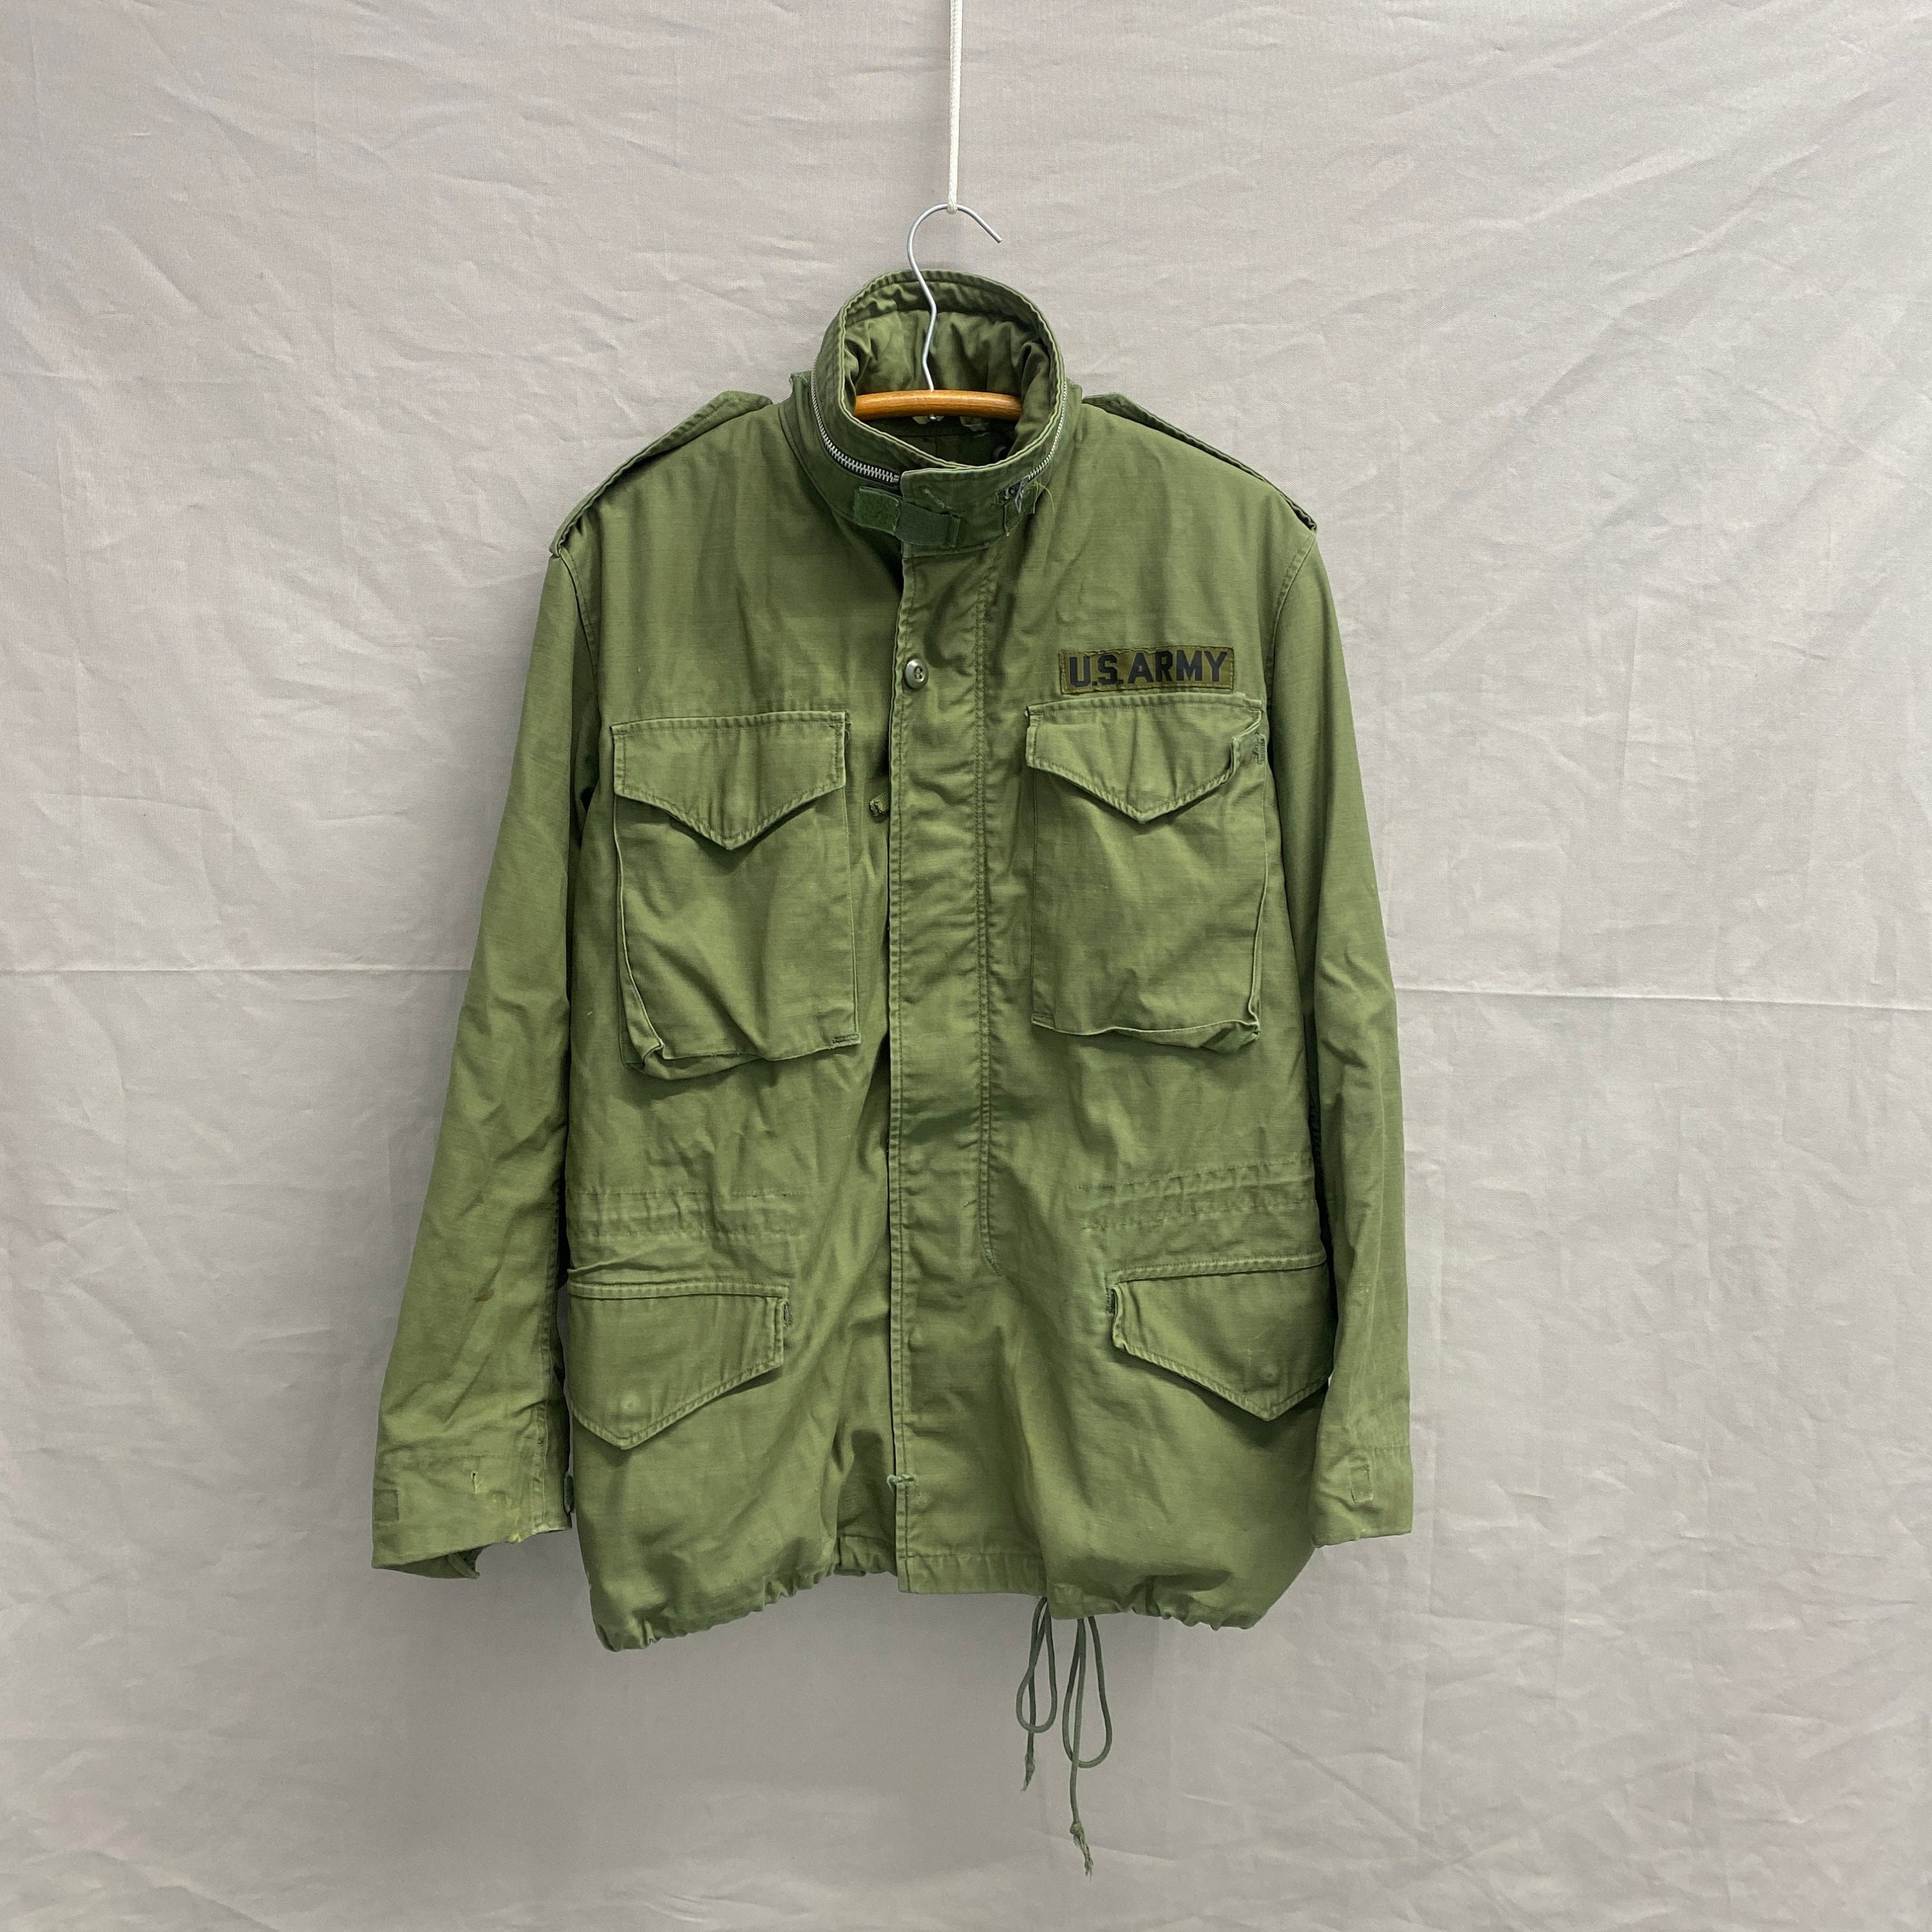 Maden M65 Jackets For Men Army Green Oversize Denim Jacket Military Vintage  Casual Windbreaker Solid Coat Clothes Retro Loose